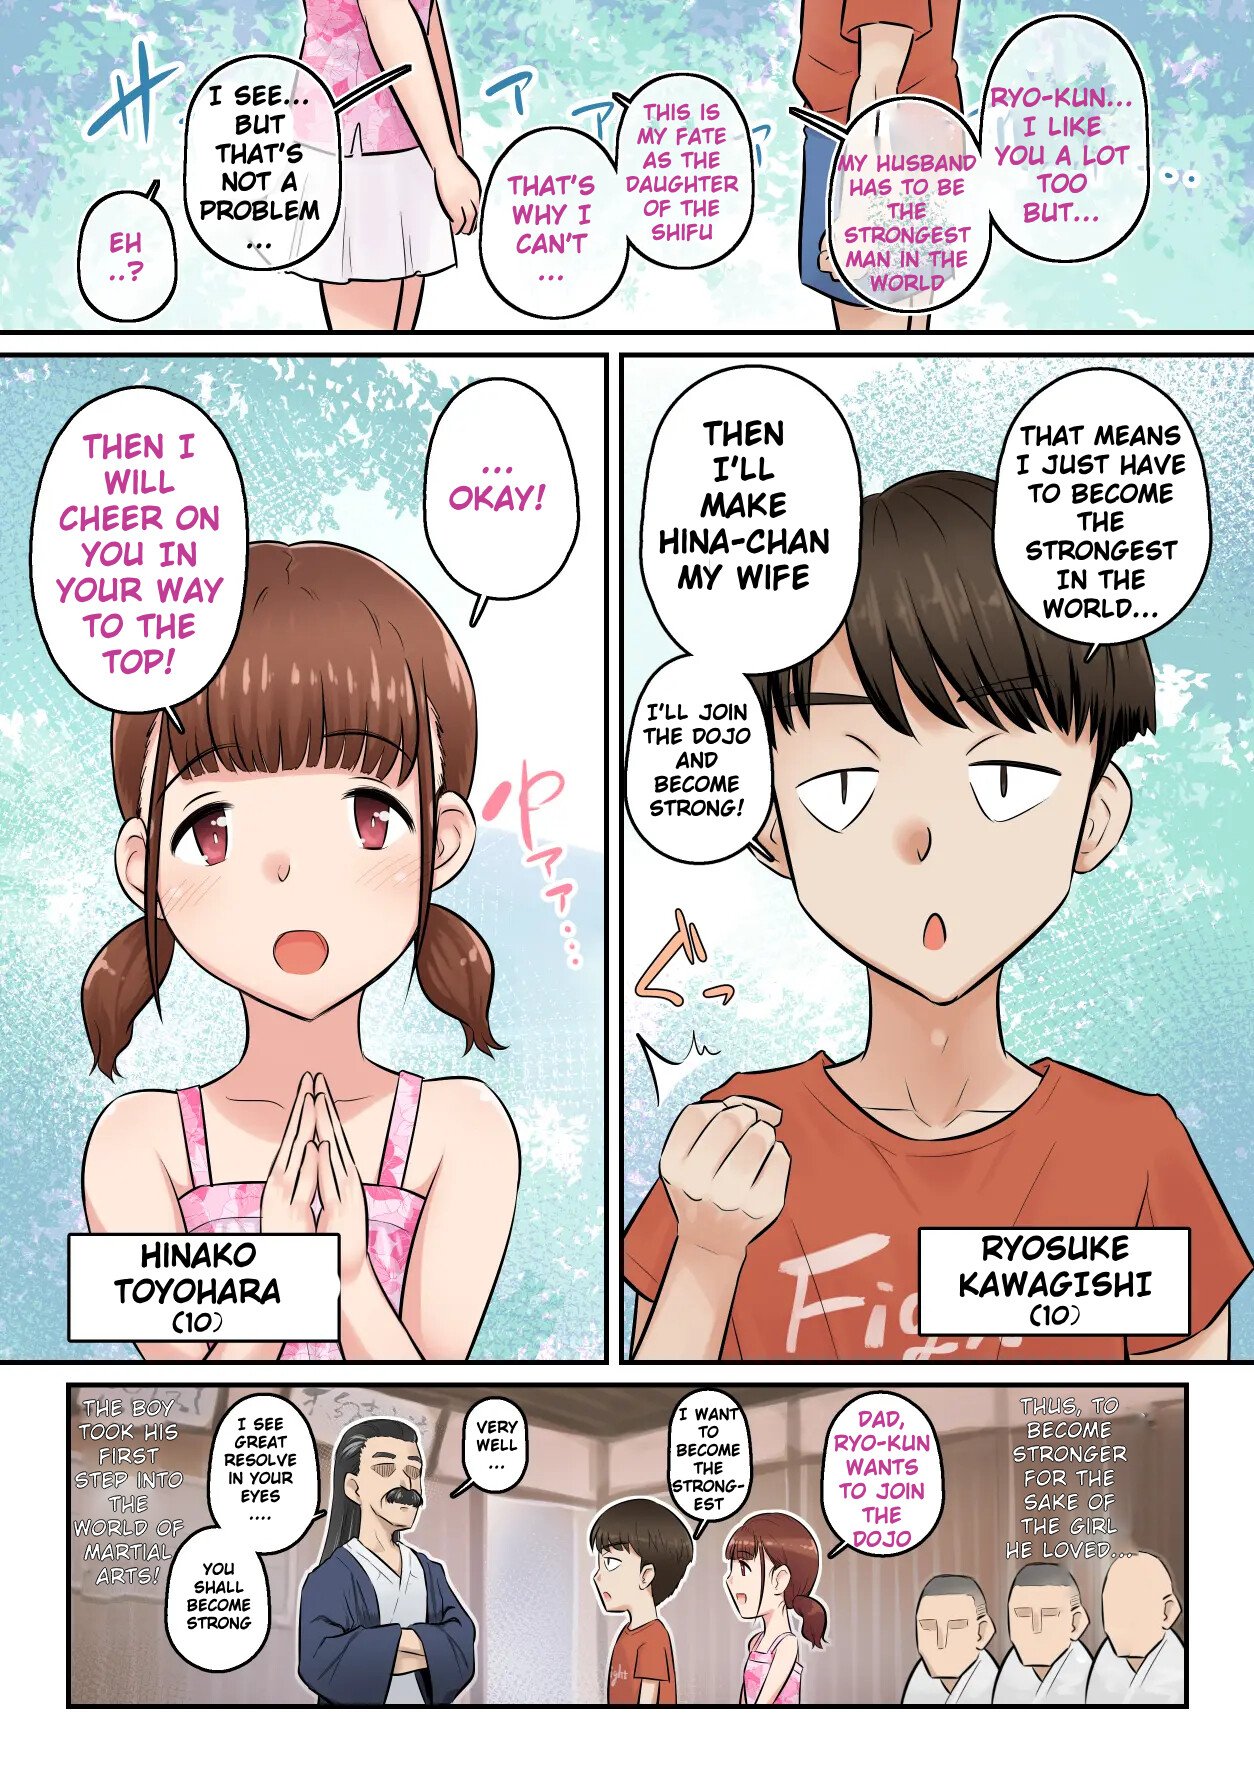 Hentai Manga Comic-A Story About a Childhood Friend Taken Home by a Dojo-Breaker Then Getting Fucked and Seeded for a Whole Month-Read-2